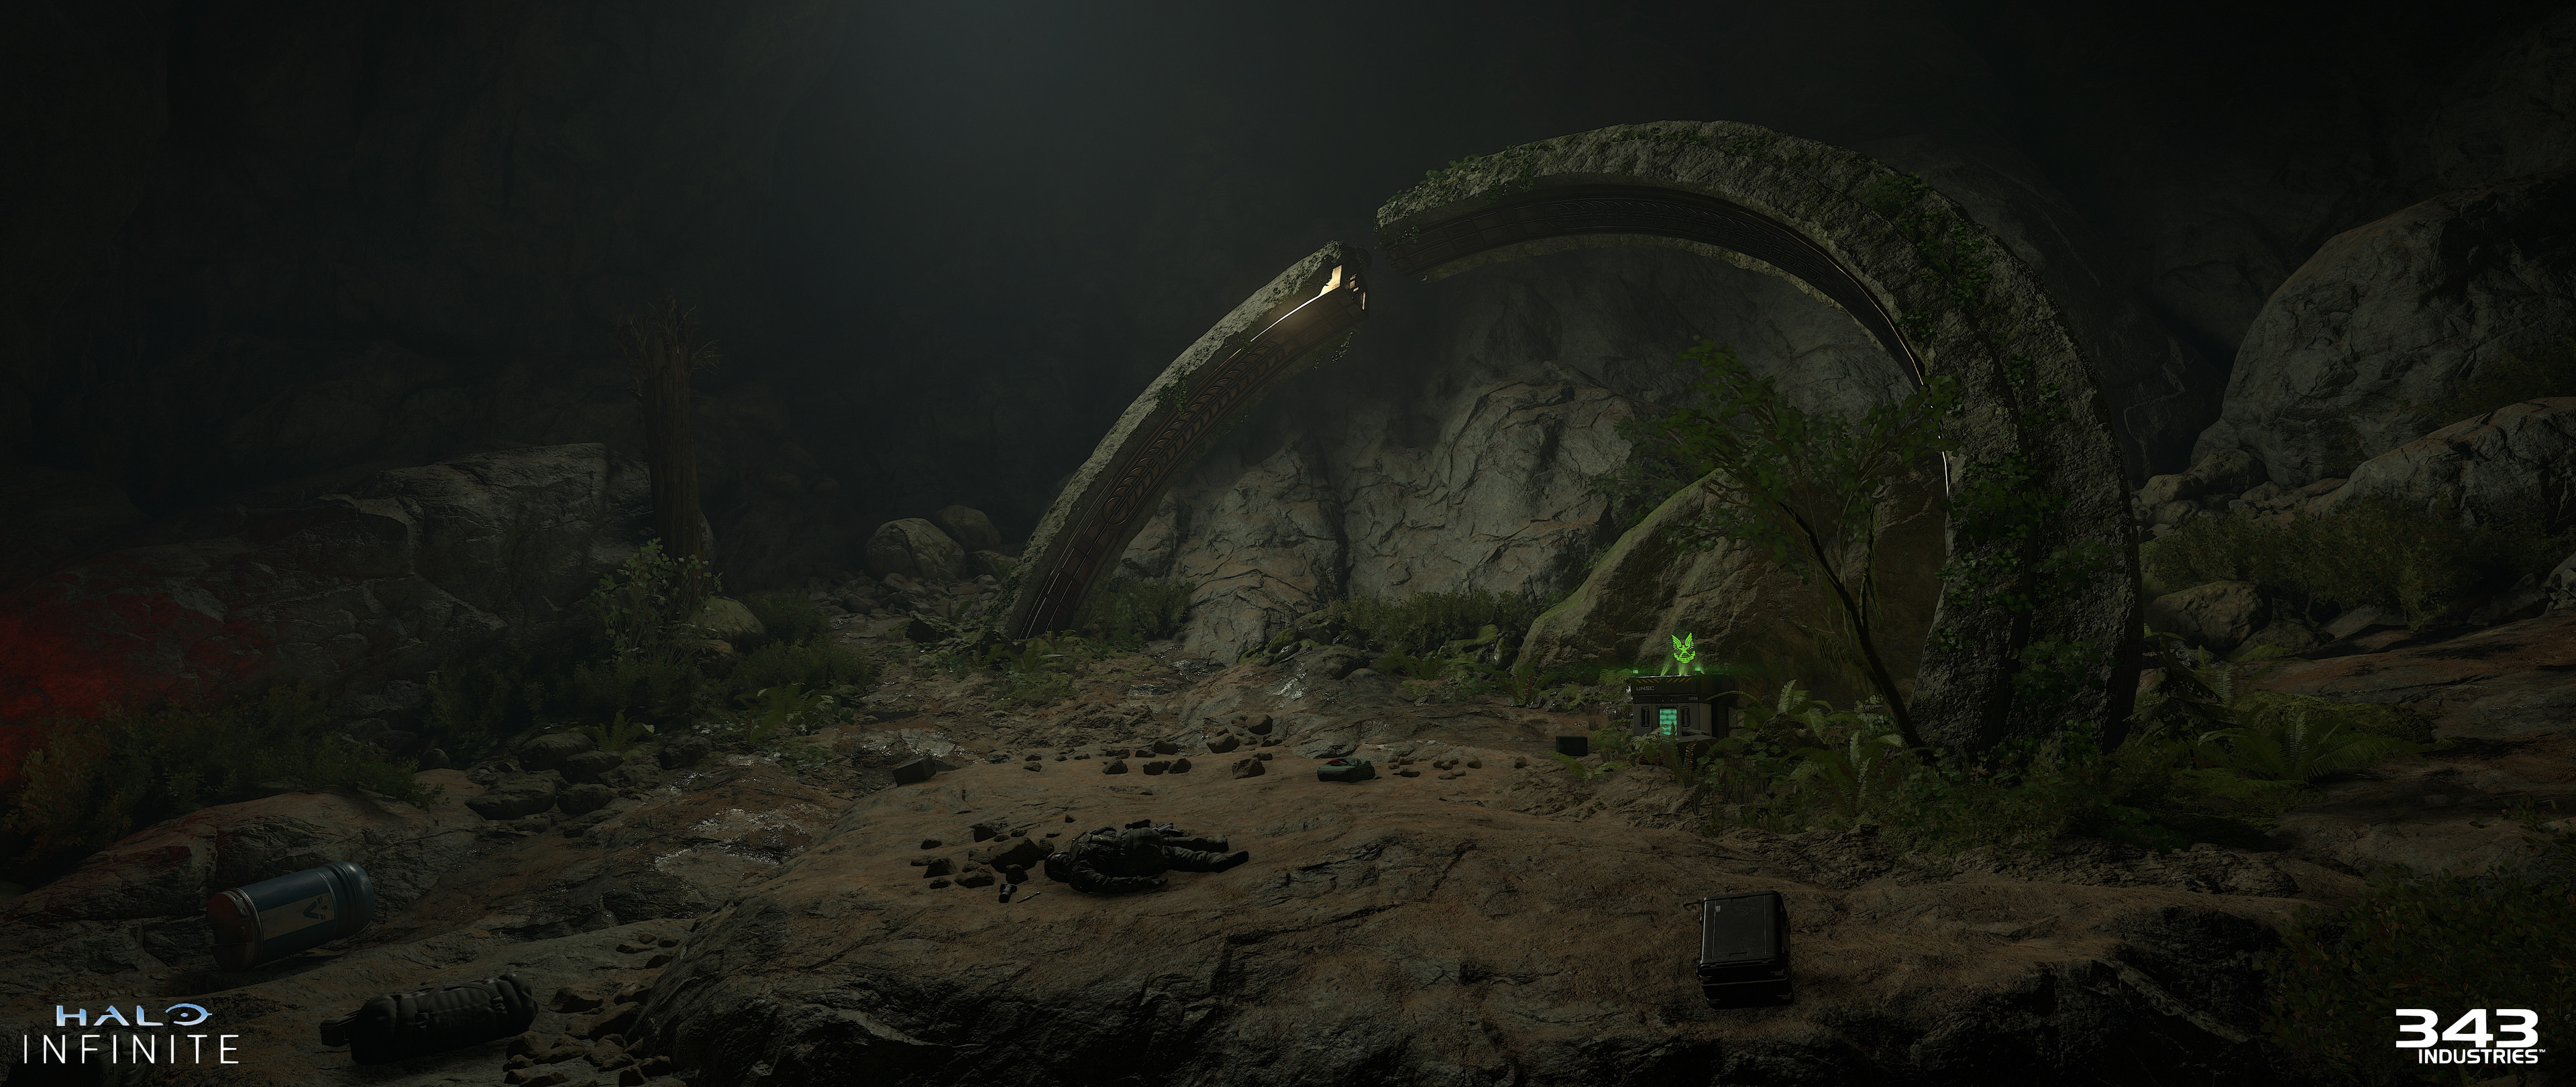 Responsible just for polish and cleanup, vegetation around Forerunner asset, and detailing with smaller rock assets.